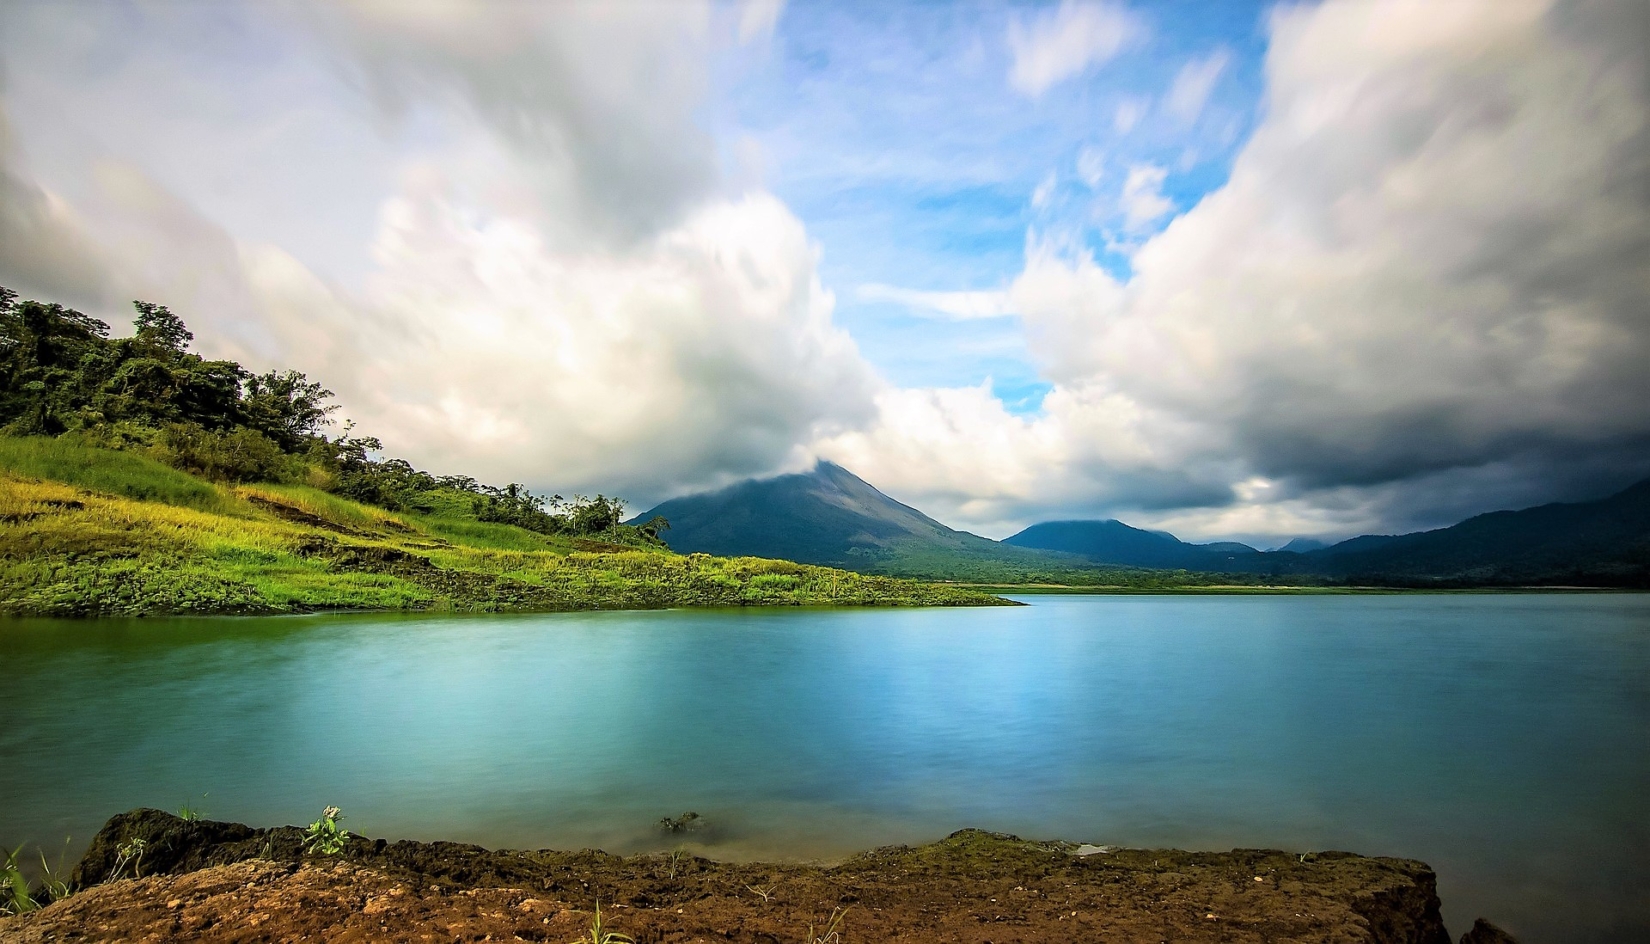 Landscape view of the turquoise colored Lake Arenal in Costa Rica